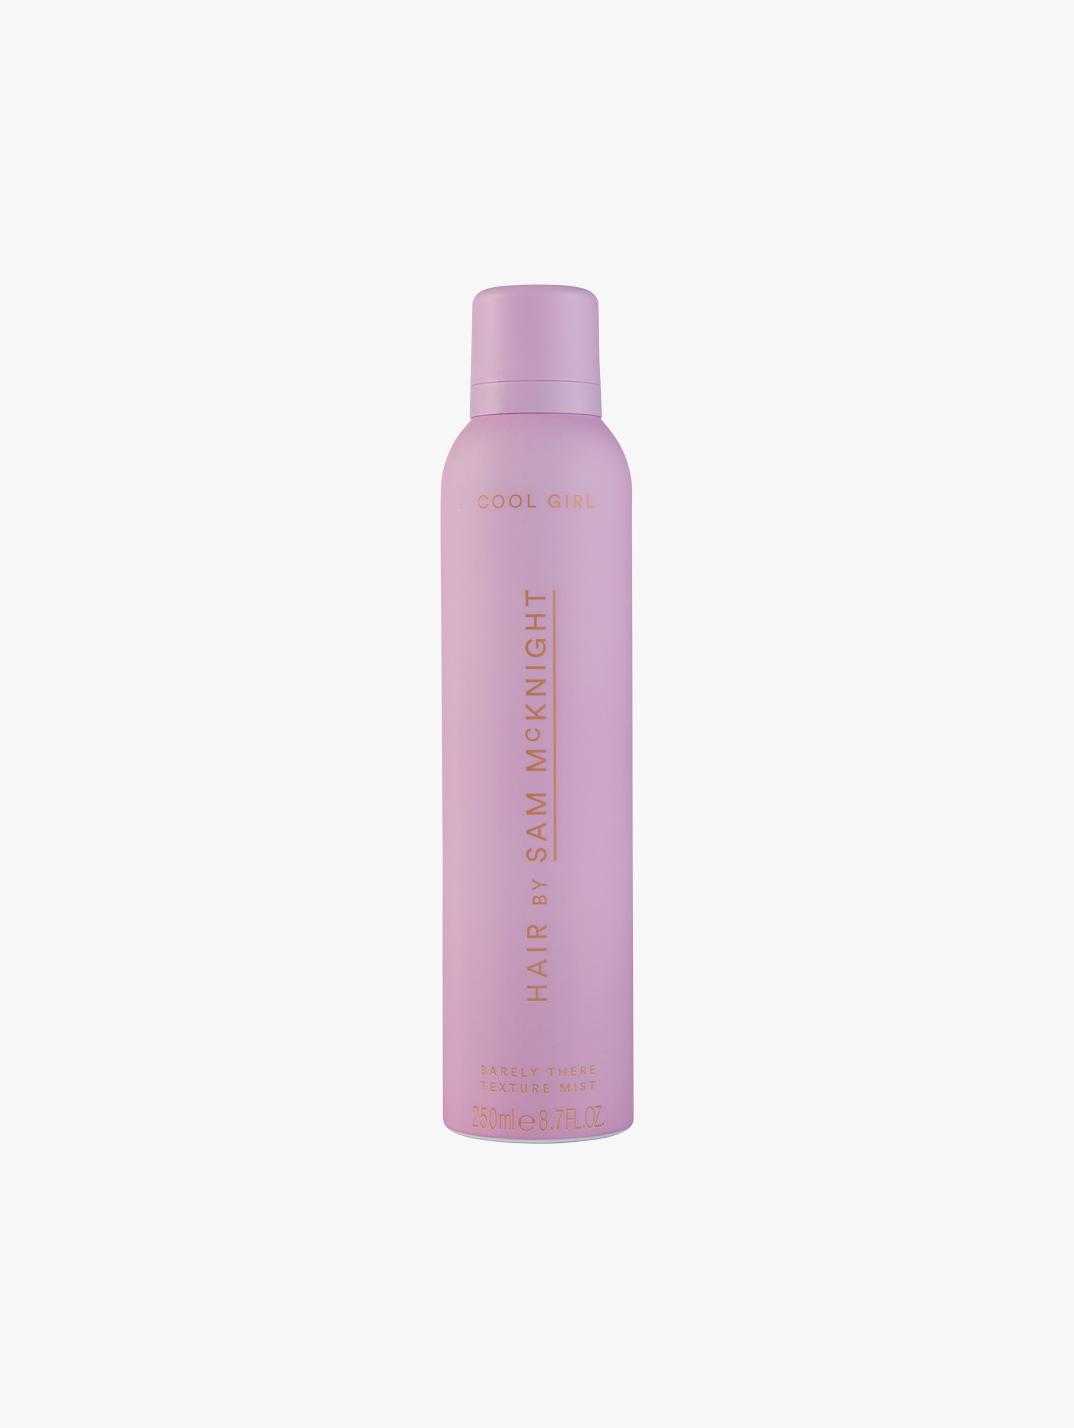 Cool Girl (Barely There Texture Mist) de Hair by Sam – LACONICUM